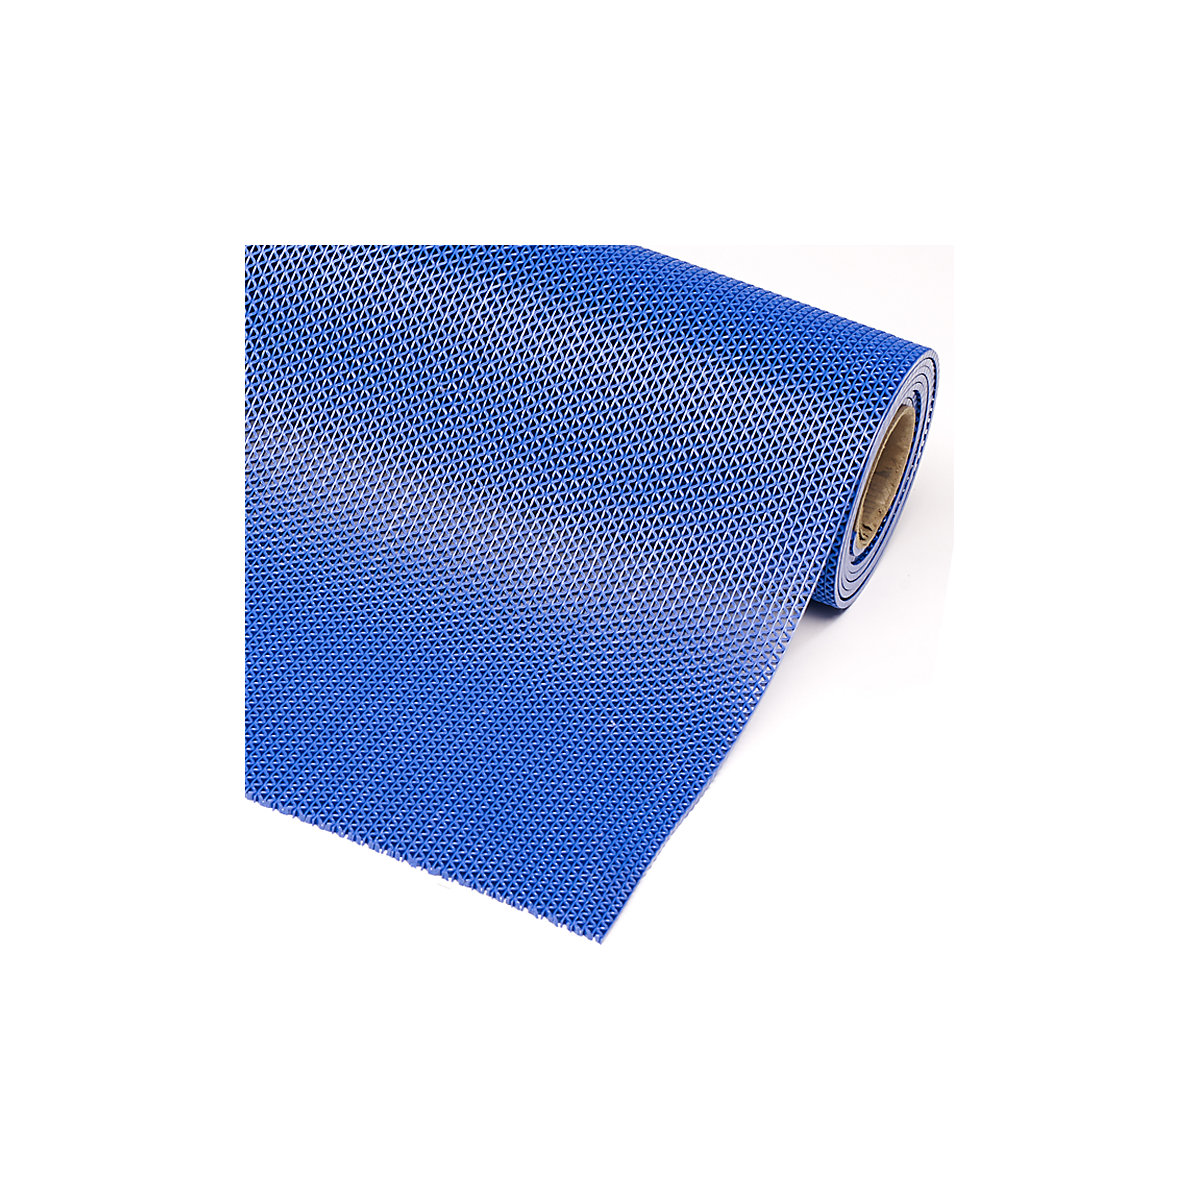 Wet room matting height 5.3 mm – NOTRAX, width 1200 mm, sold by the metre, blue-3